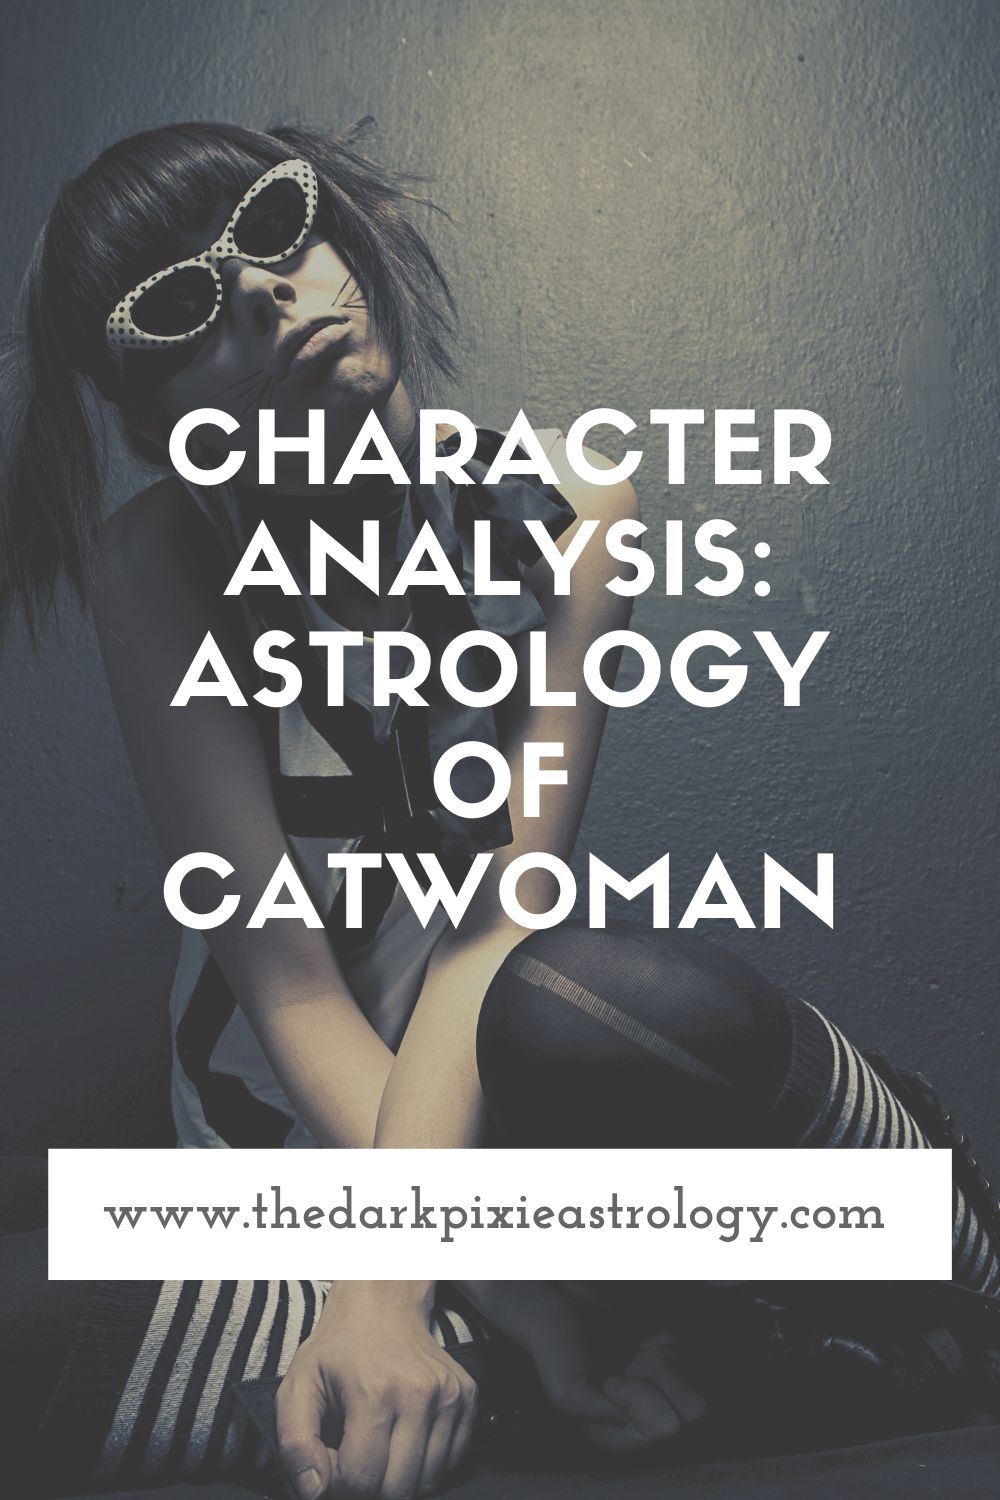 Character Analysis: Astrology of Catwoman - The Dark Pixie Astrology